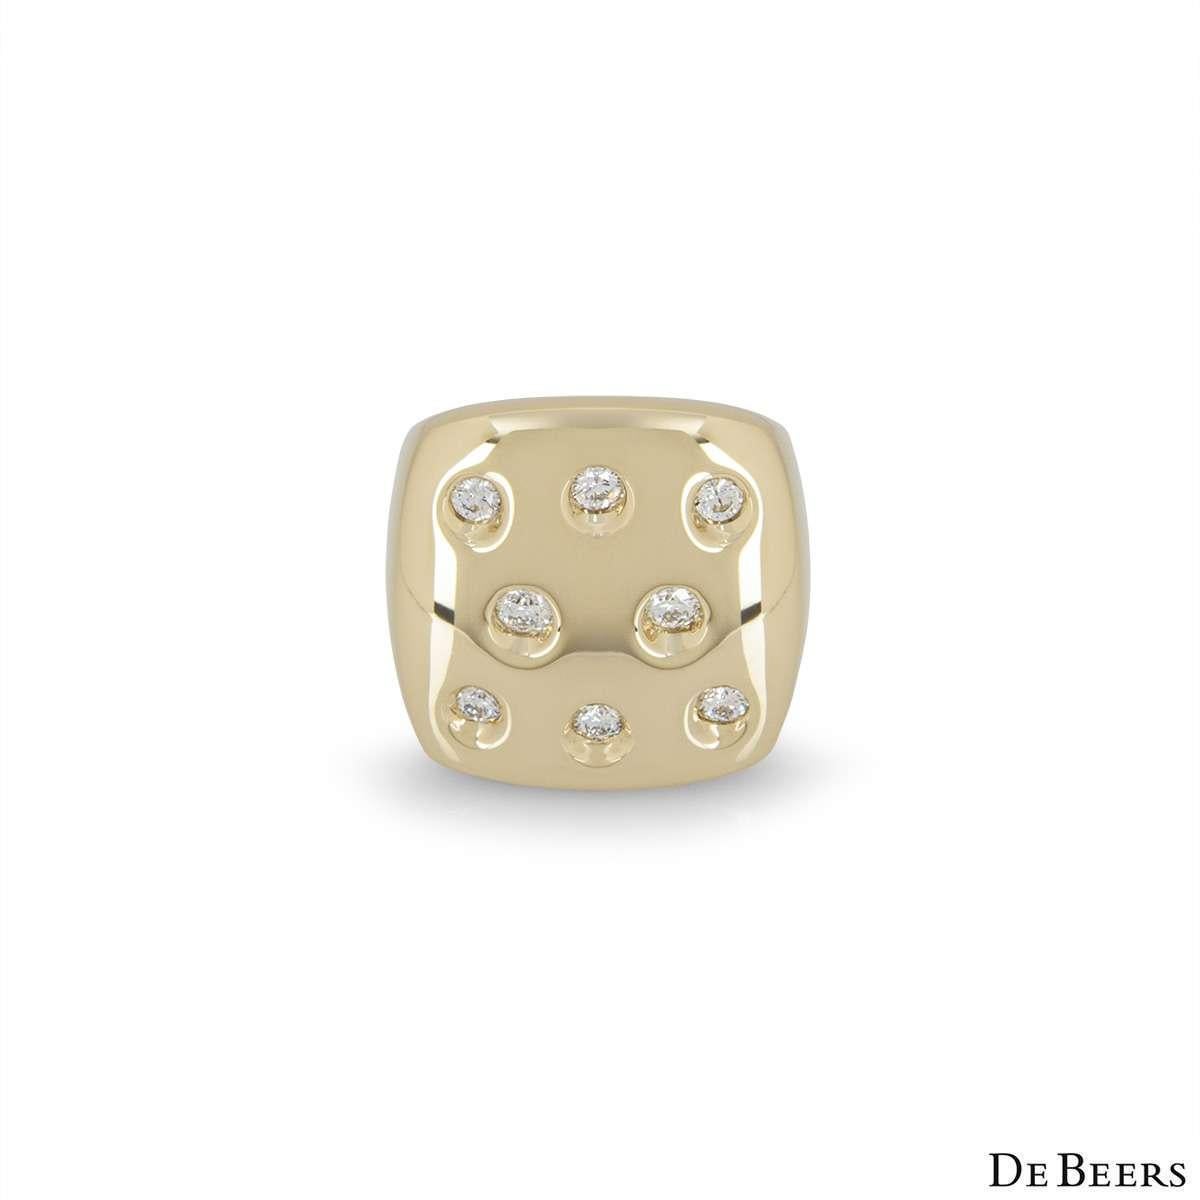 An 18k yellow gold dress ring by De Beers. The front of the ring is square in shape and is set with 8 round brilliant cut diamonds totalling approximately 0.56ct. The ring measures 2.2cm in width and is a size UK M - EU 52 - US 38, with a gross